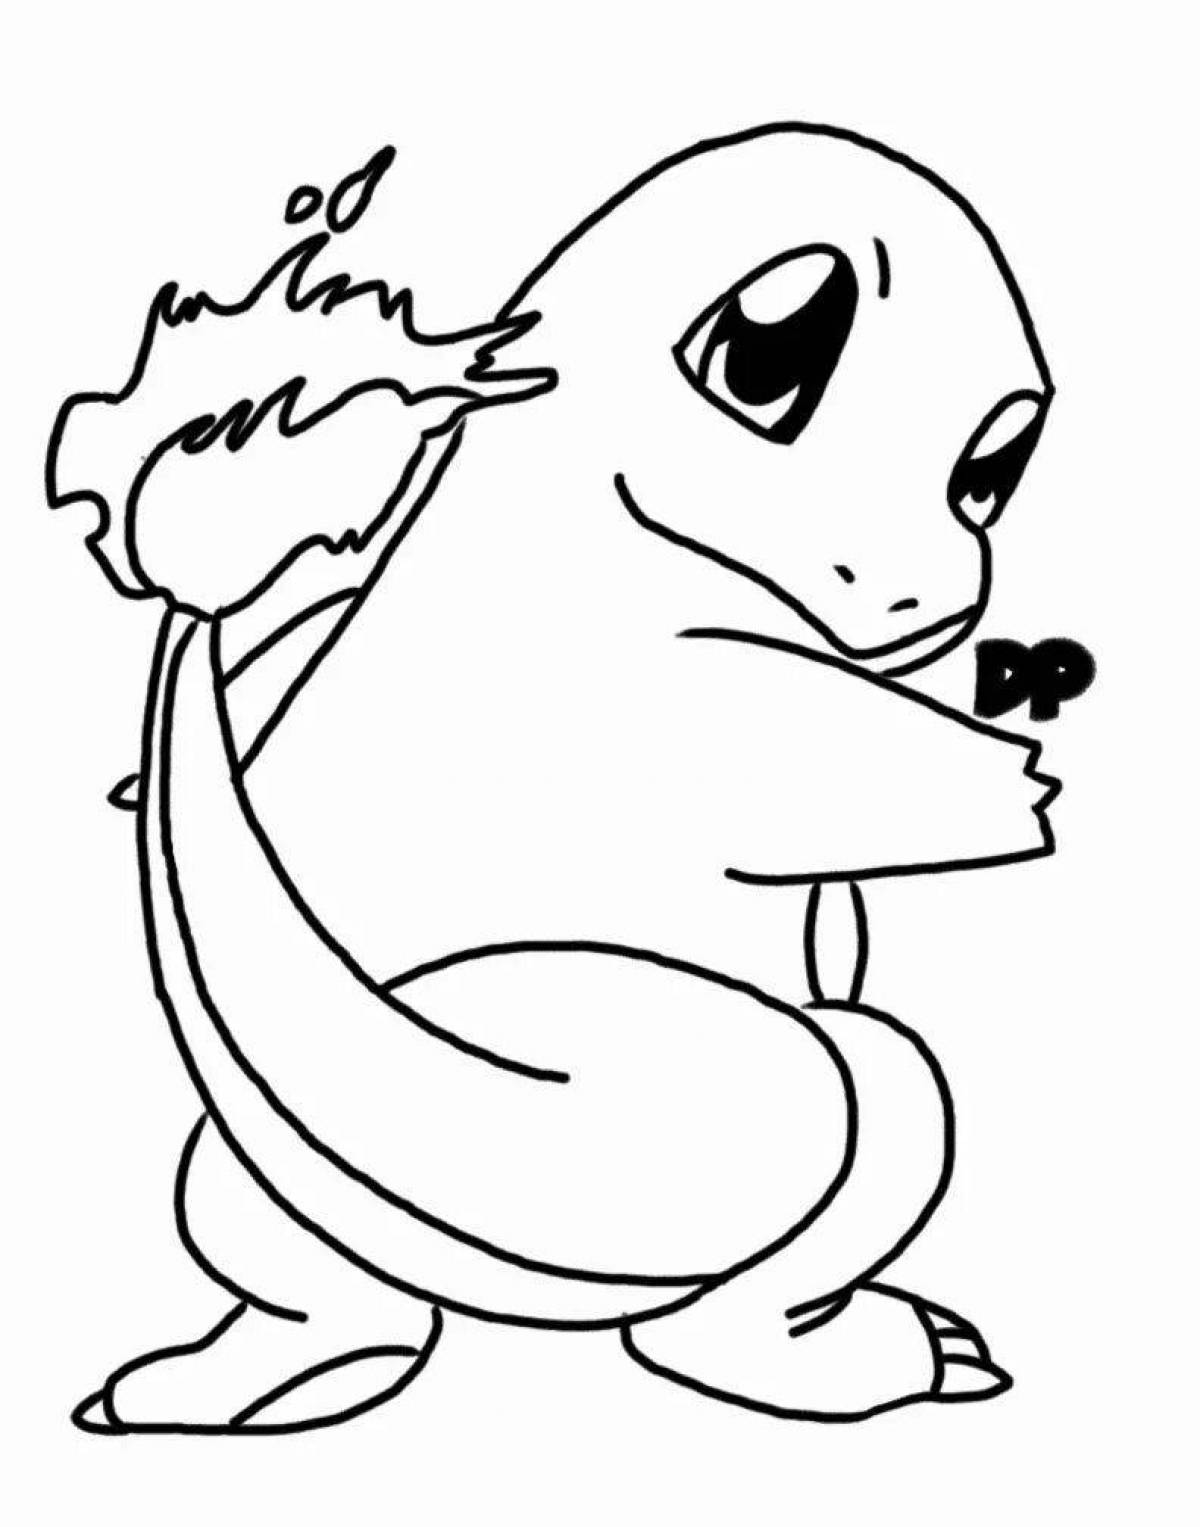 Charmander live coloring page